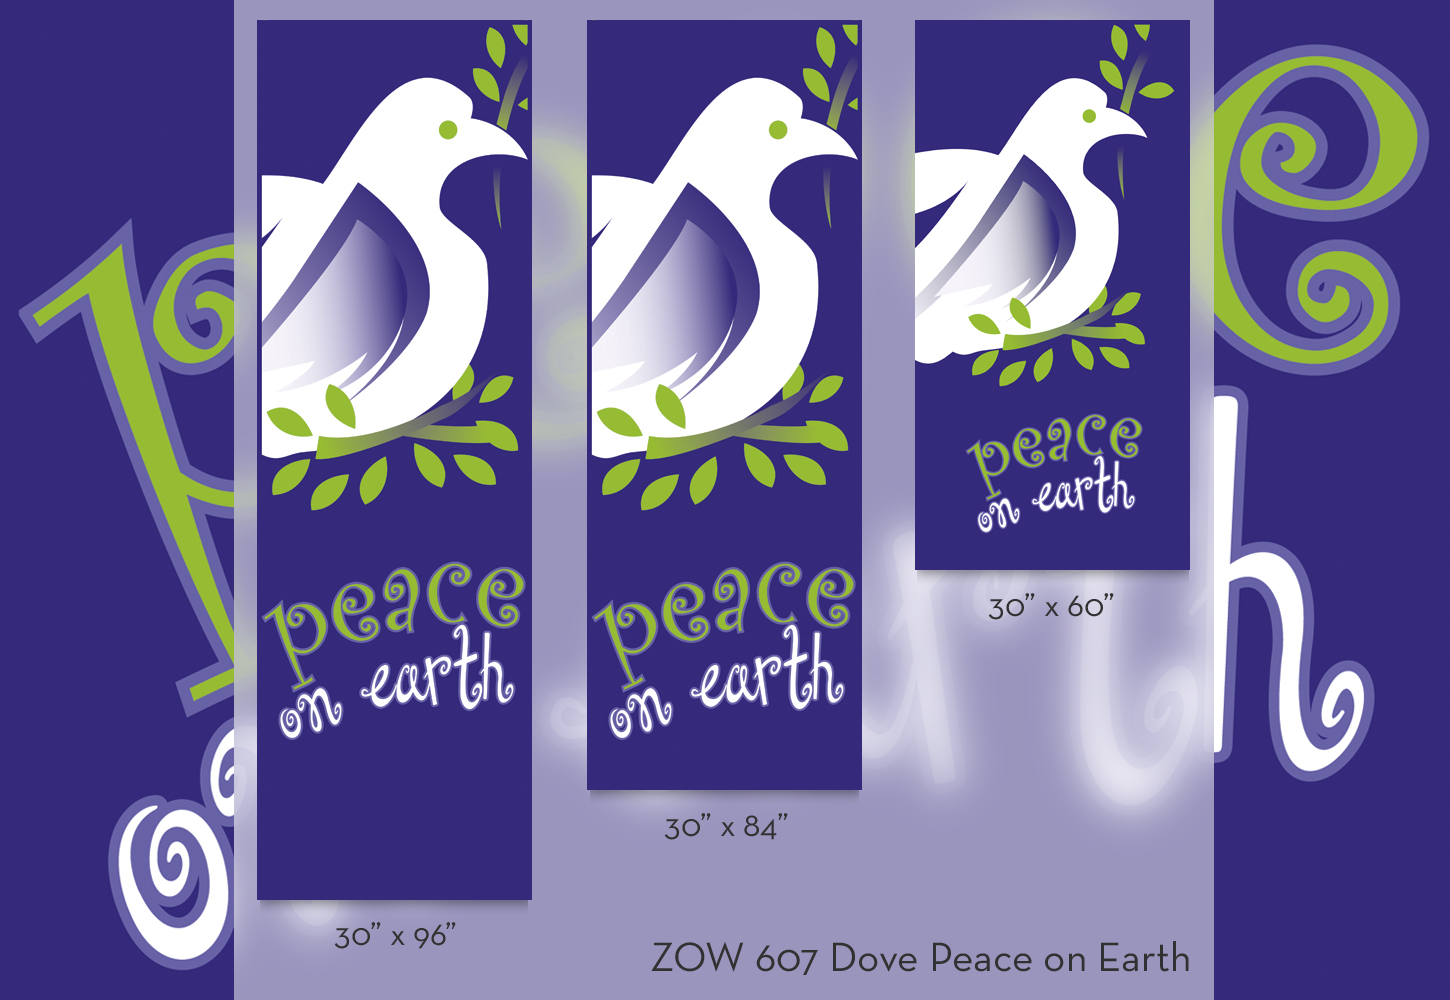 ZOW 607 Dove Peace on Earth